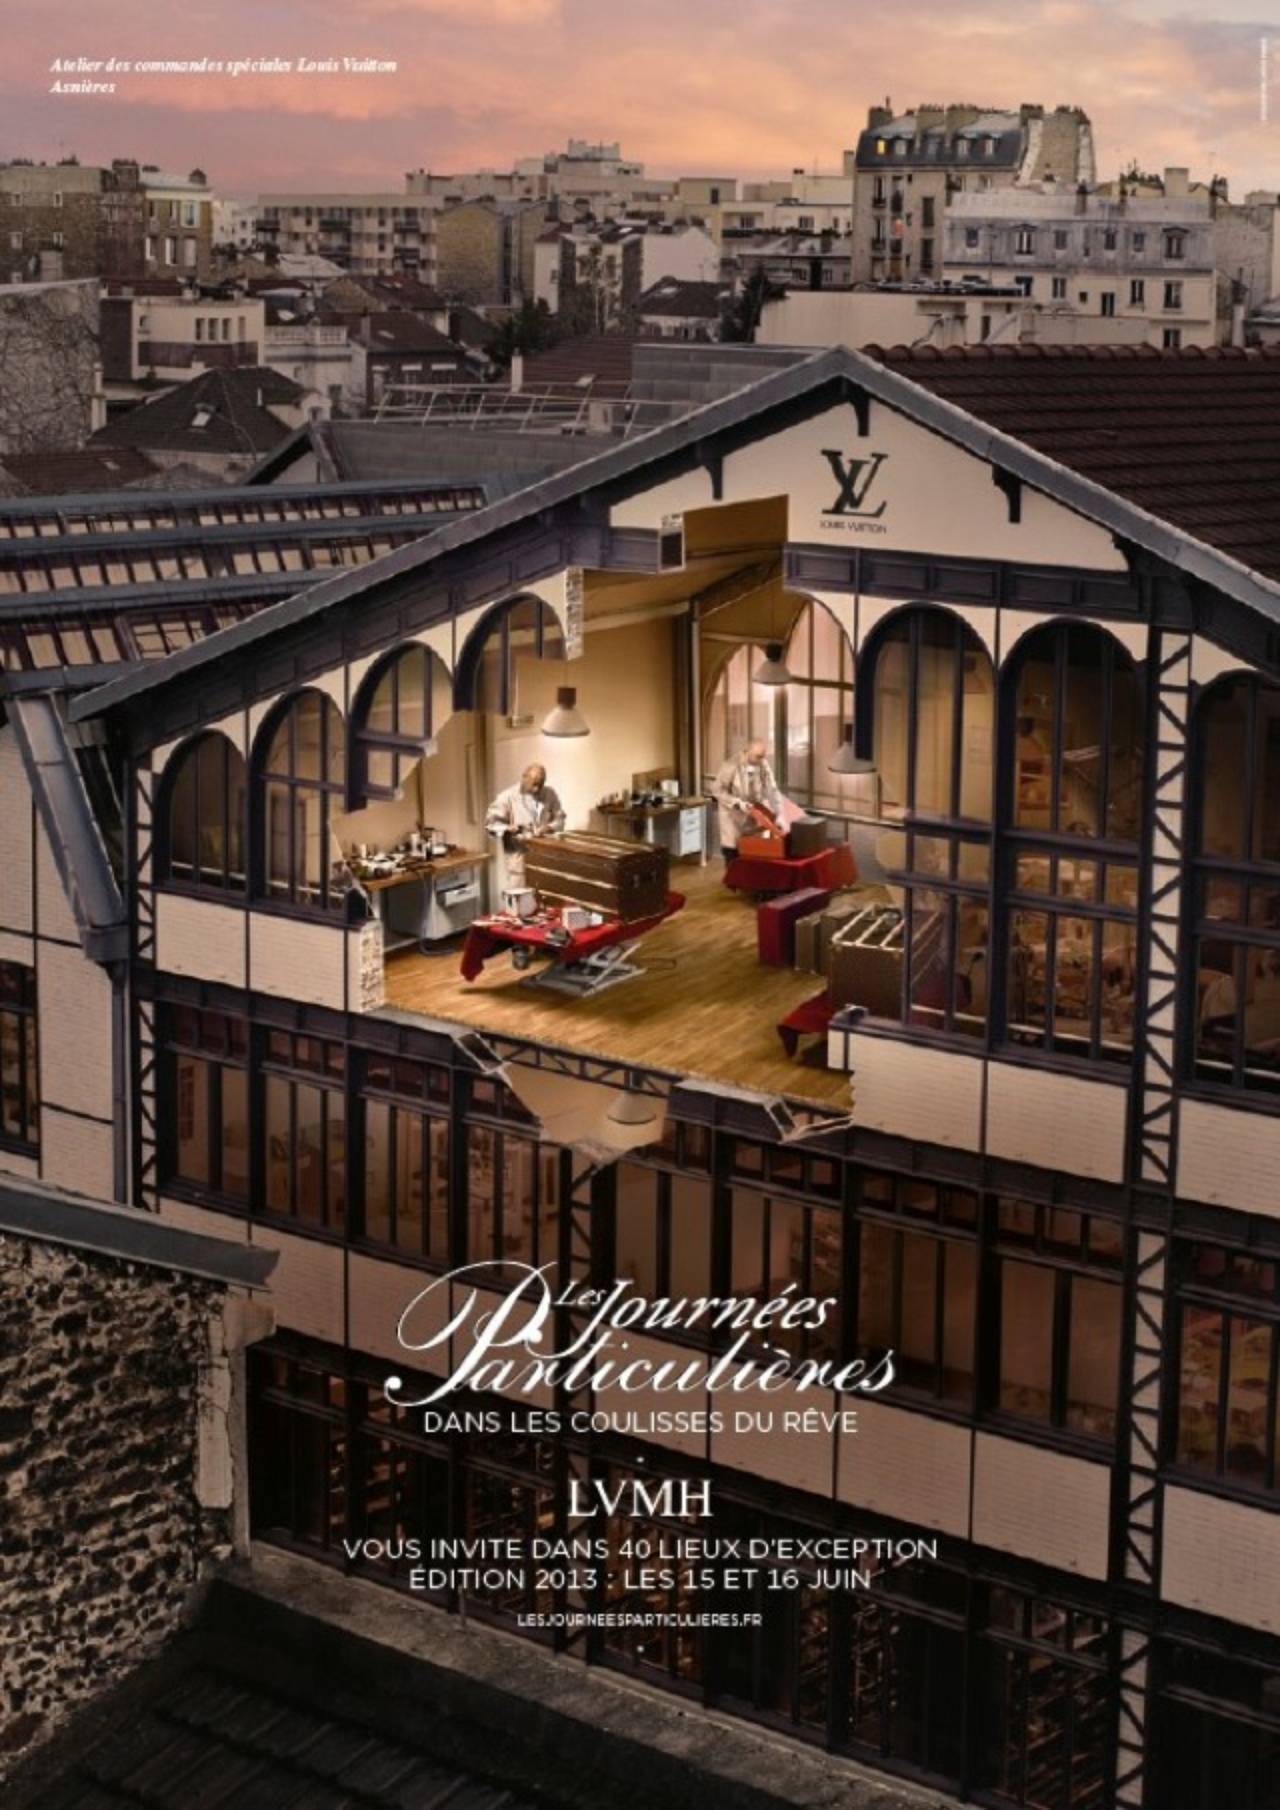 LVMH on X: The LVMH Group celebrates the inauguration of the